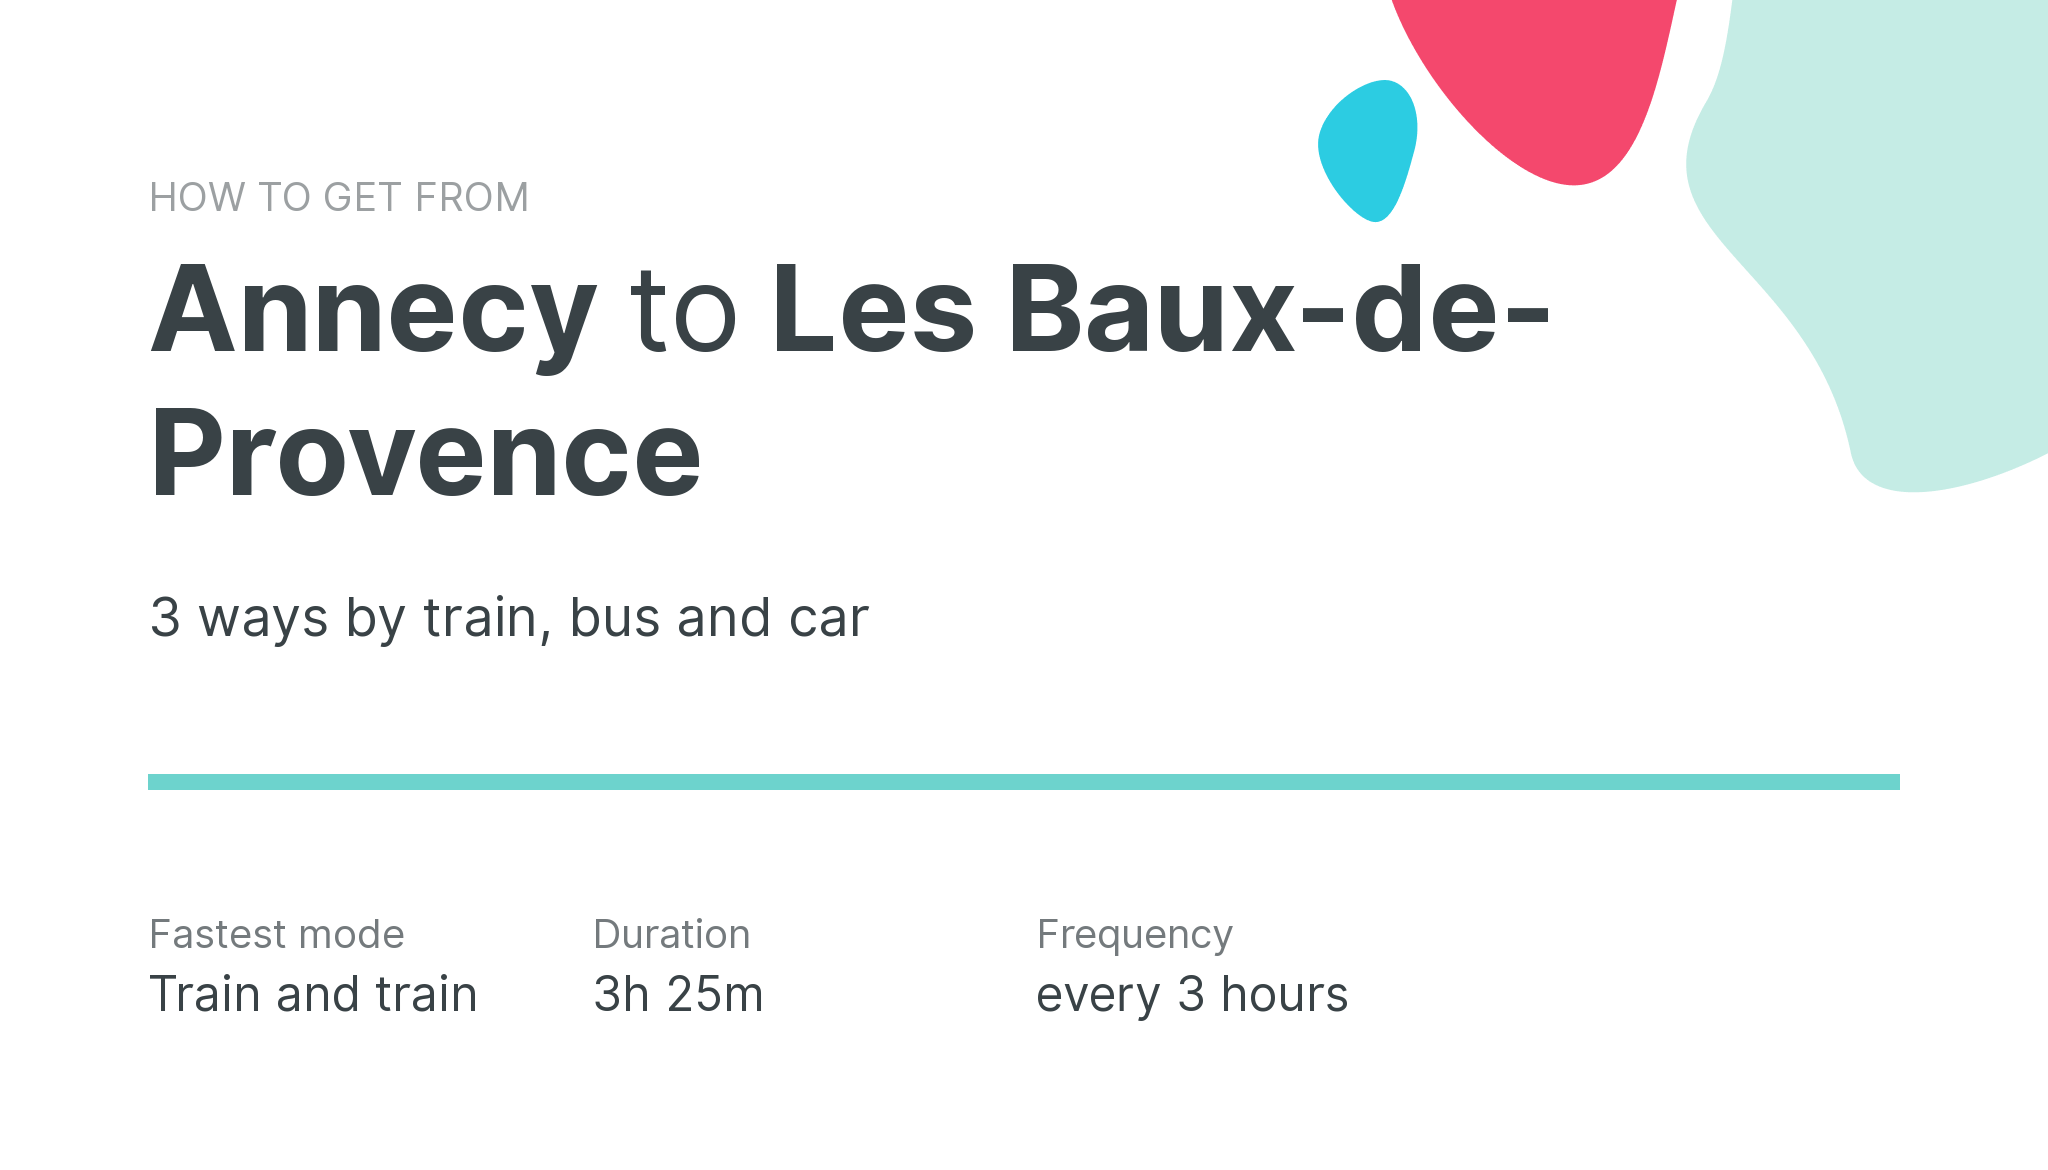 How do I get from Annecy to Les Baux-de-Provence